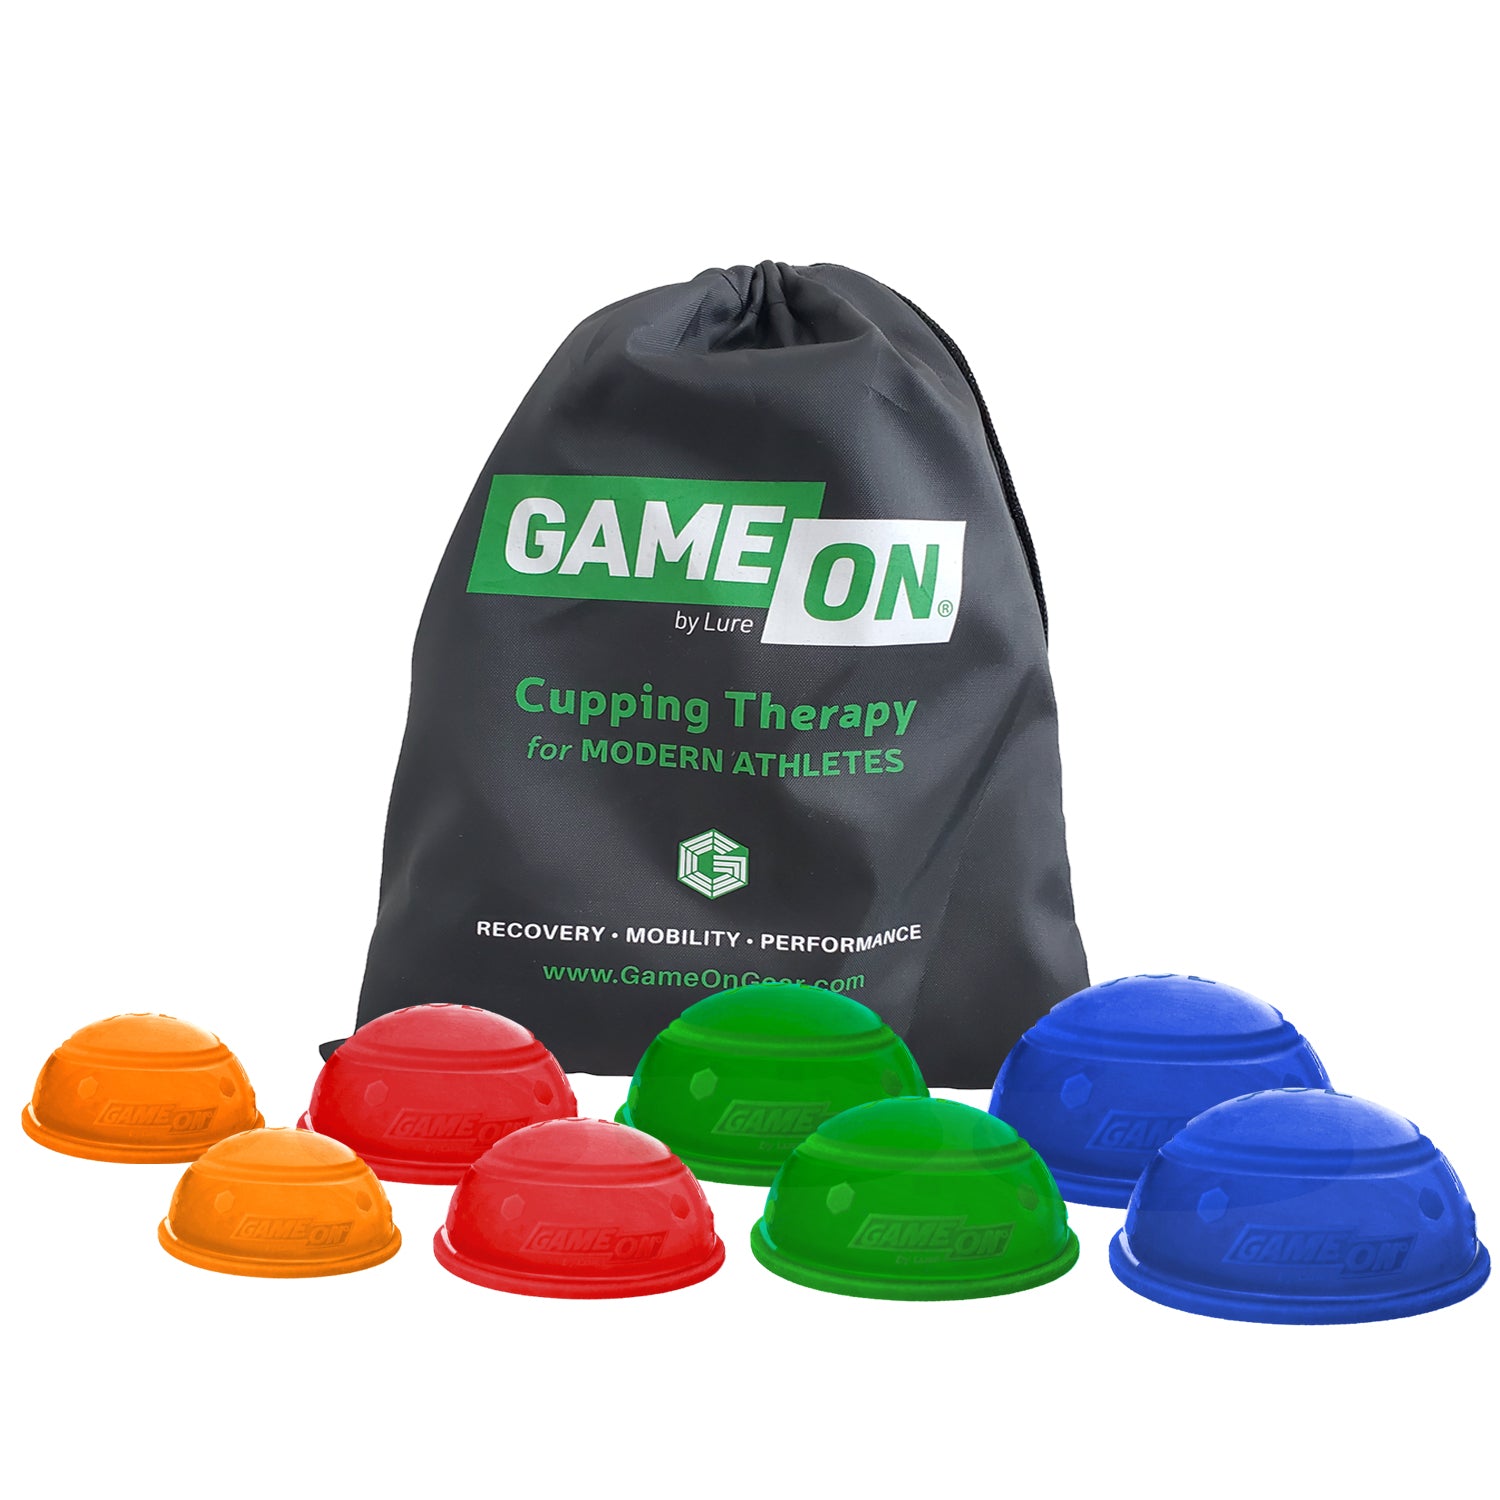 GameOnGear Jolt Cupping Therapy Set in Blue Brookstone